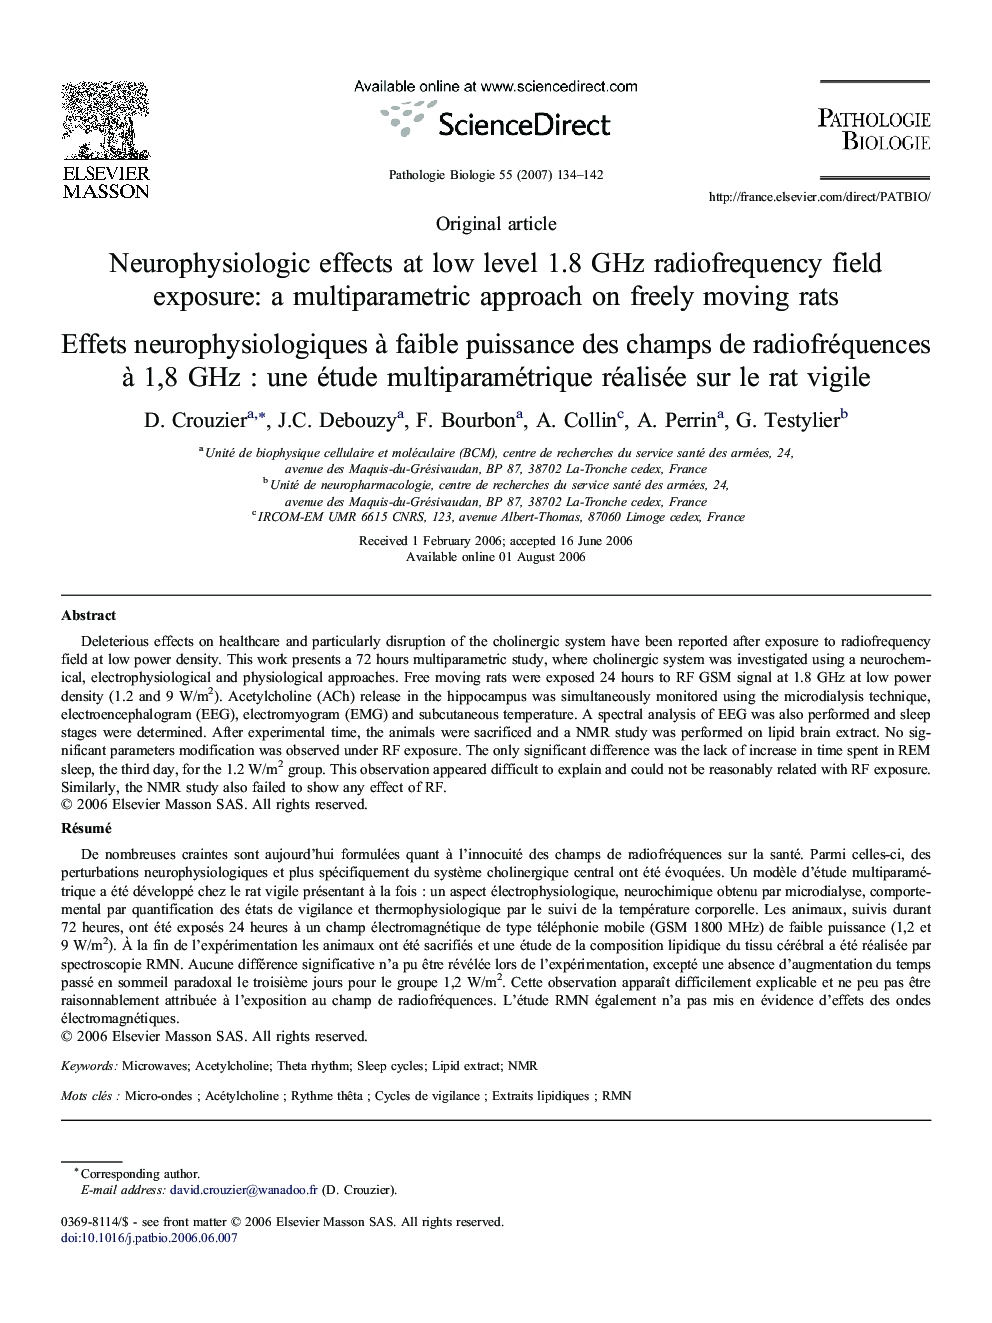 Neurophysiologic effects at low level 1.8 GHz radiofrequency field exposure: a multiparametric approach on freely moving rats